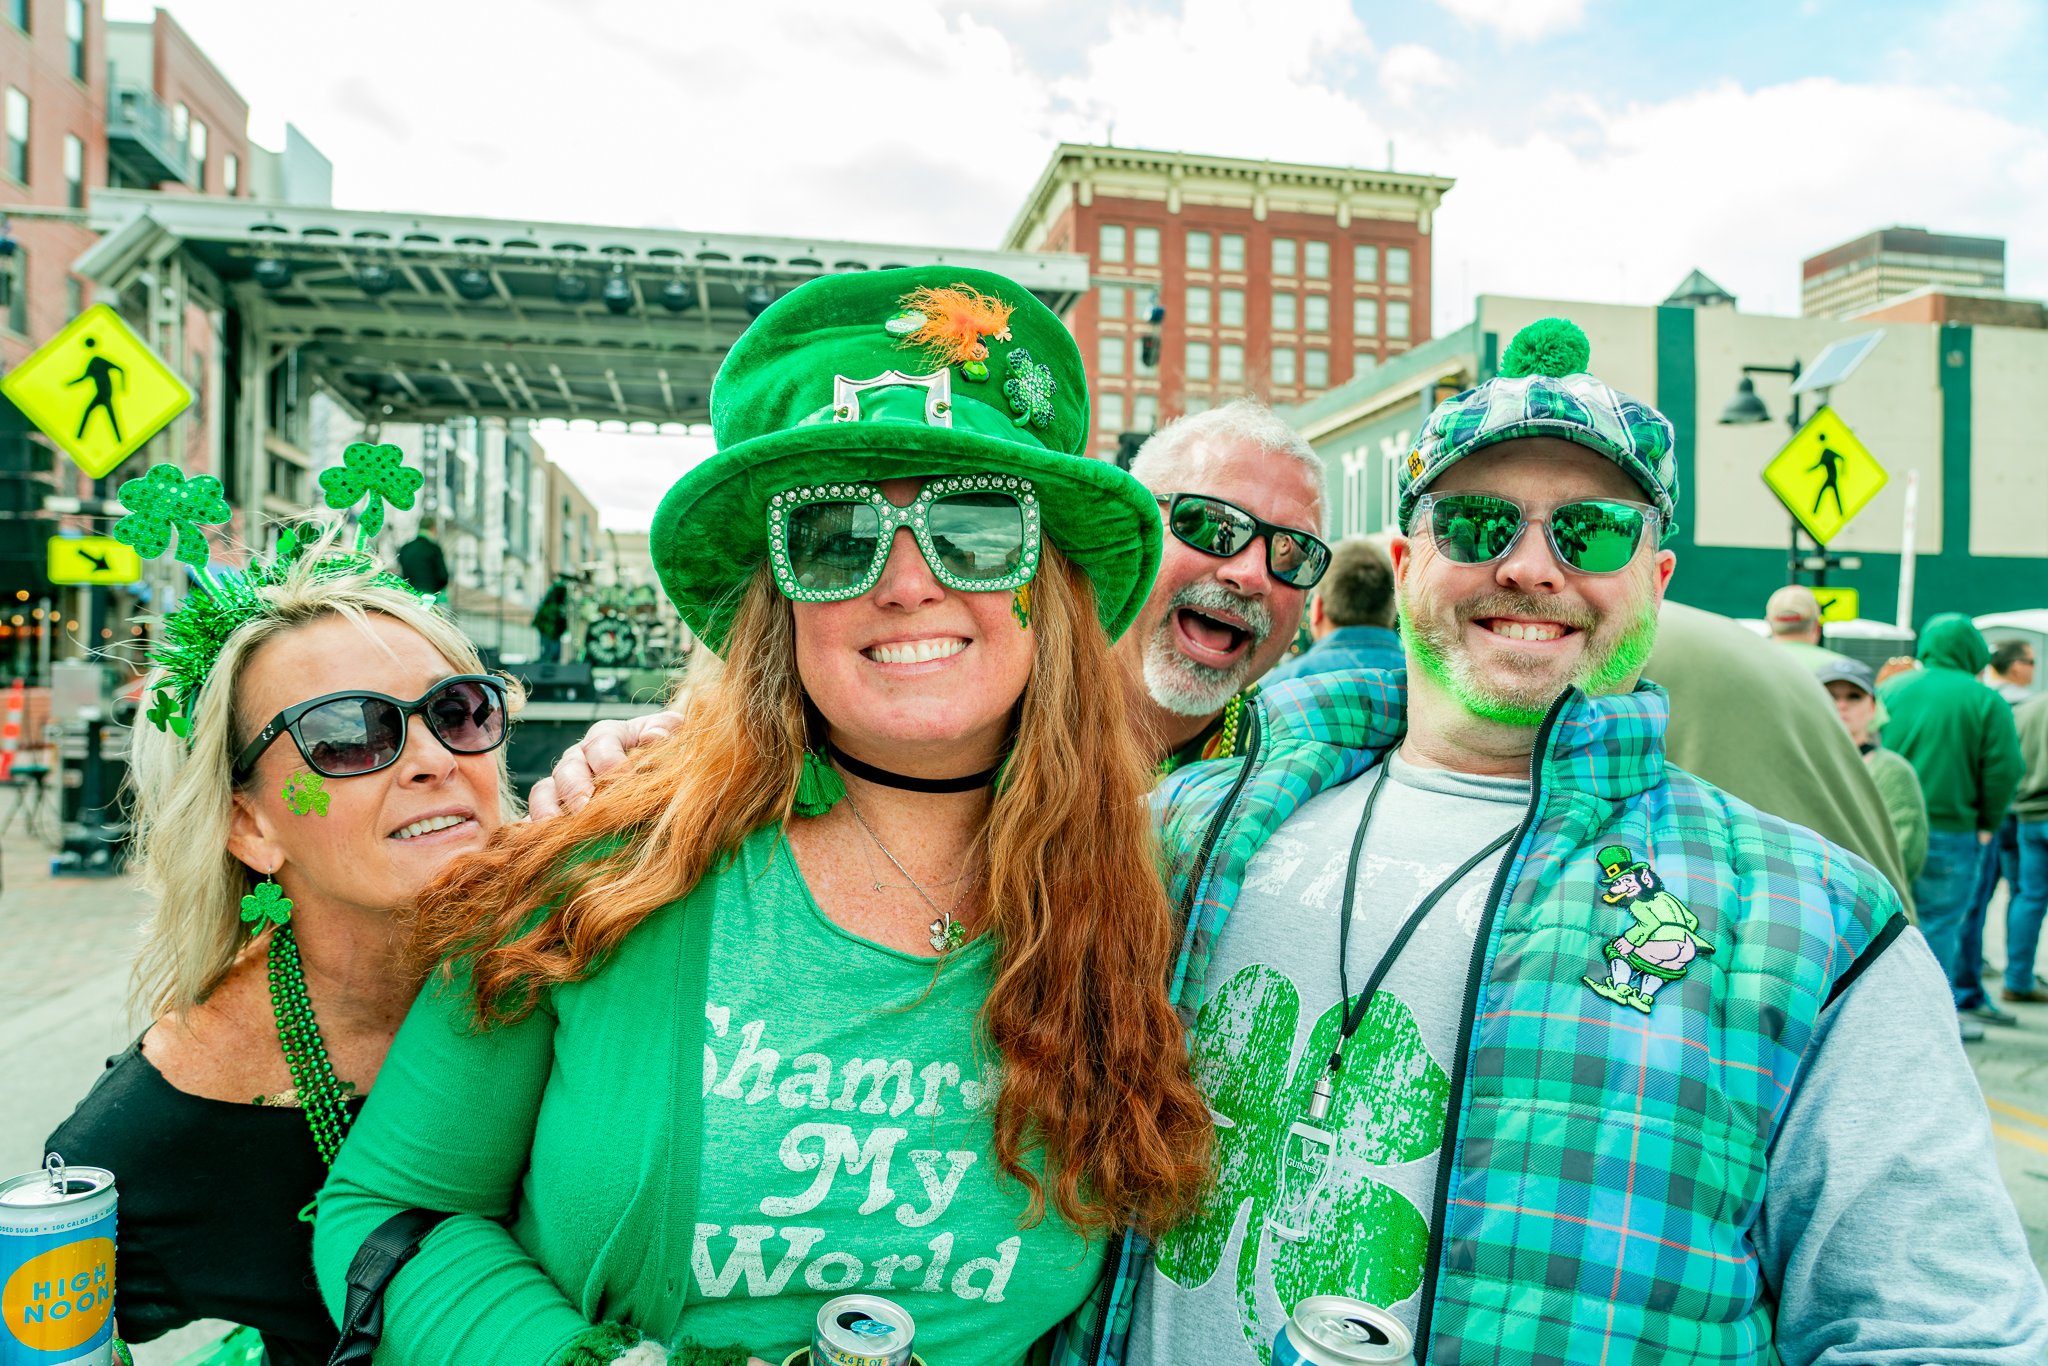 live_irish_music_and_beer_party_st_patricks_des_moines_iowa.JPG